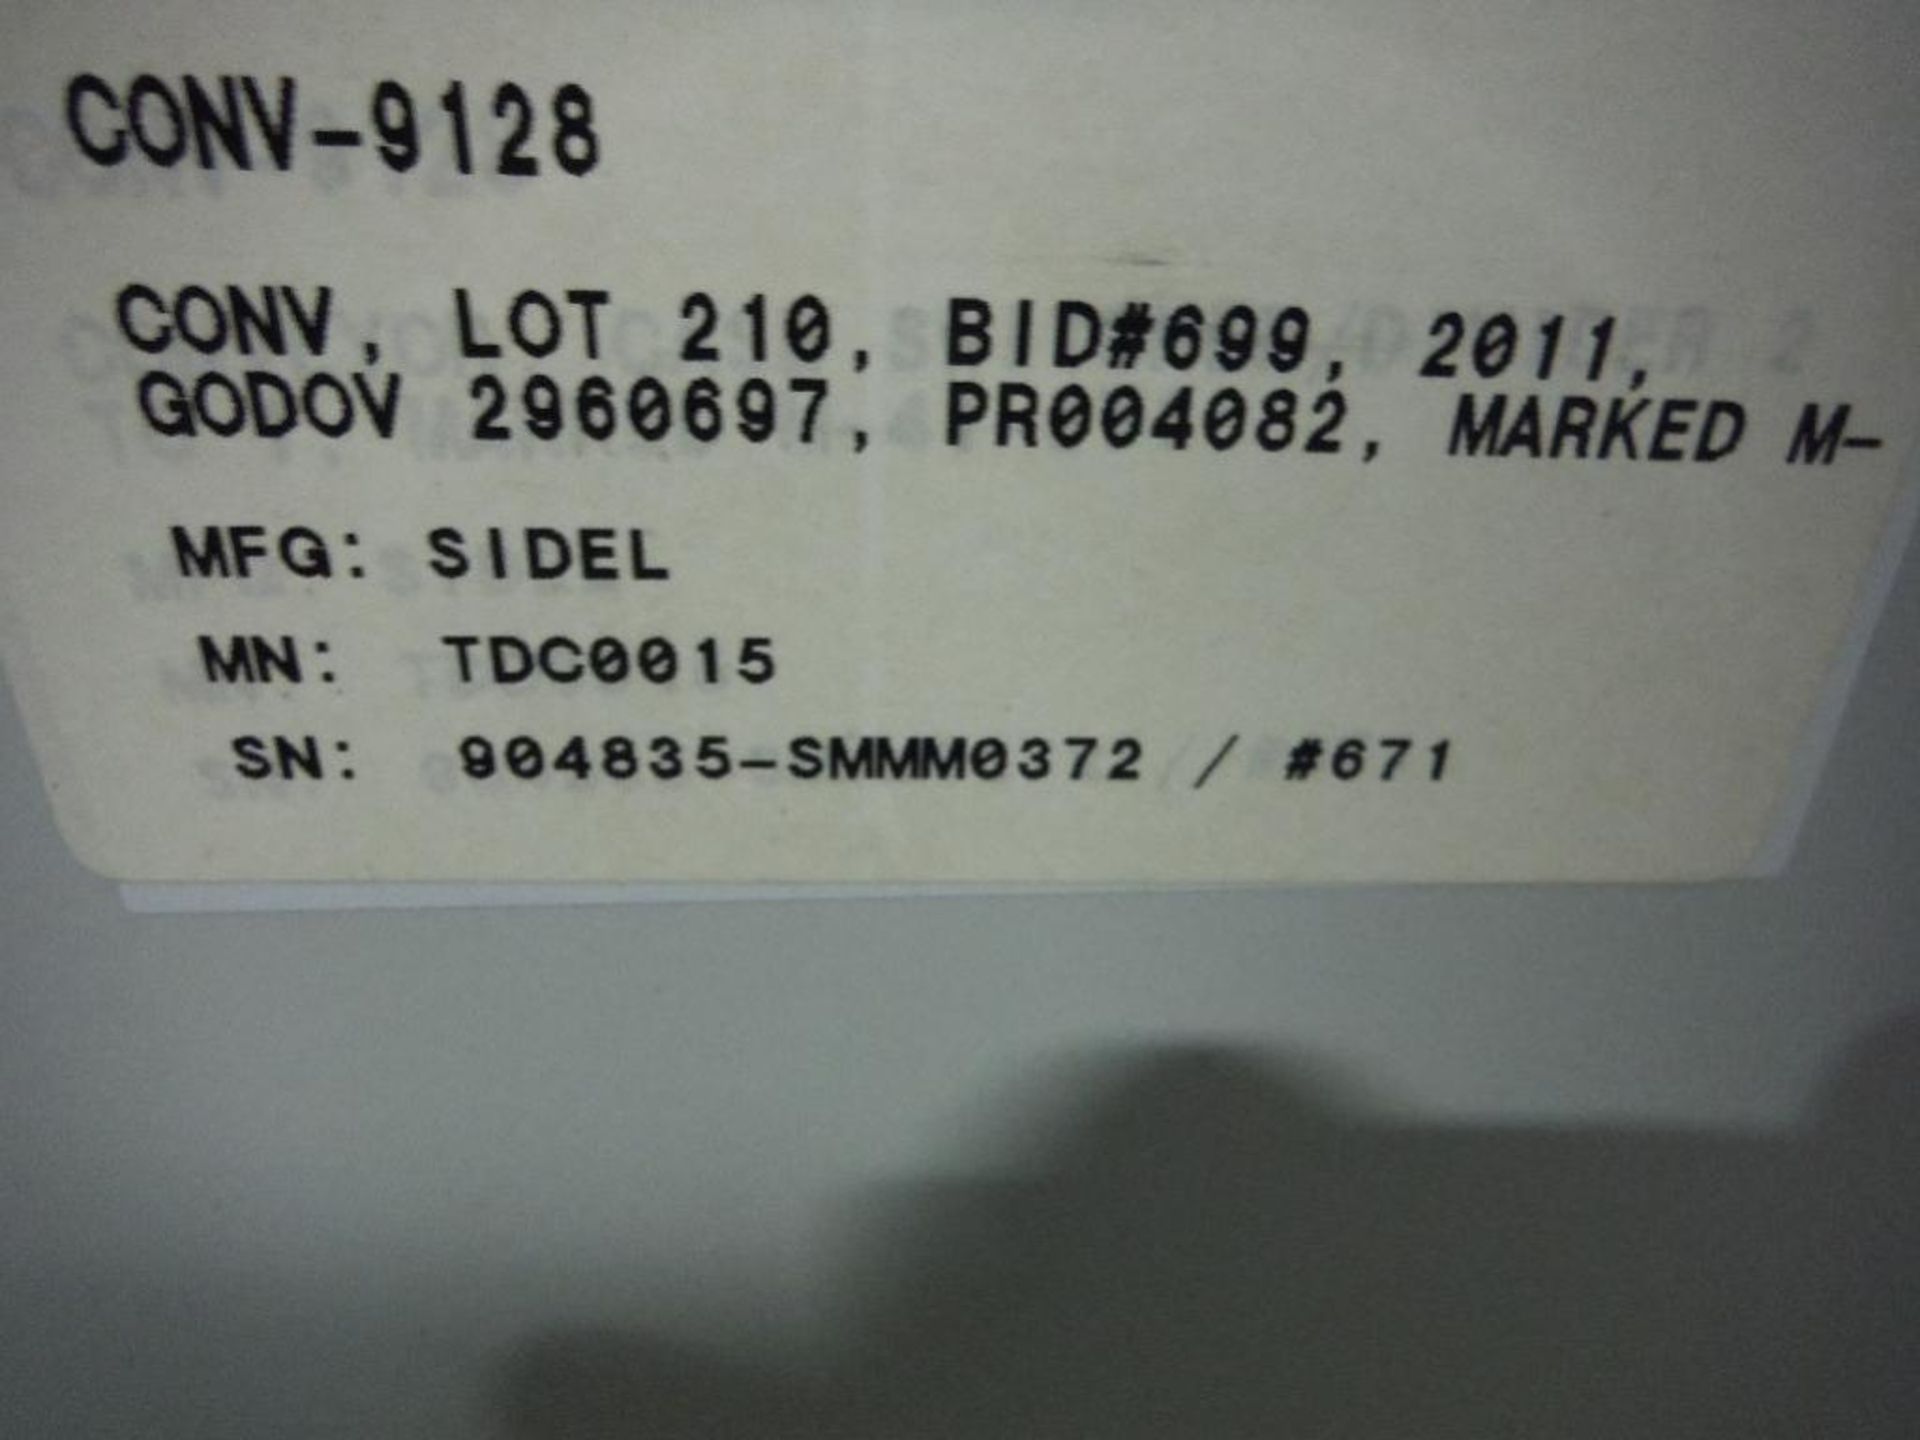 2007 Sidel combiner conveyor, Model TDC0015, SN 904835-SMMM0327, 98 in. long x 66 in. wide, with con - Image 9 of 9